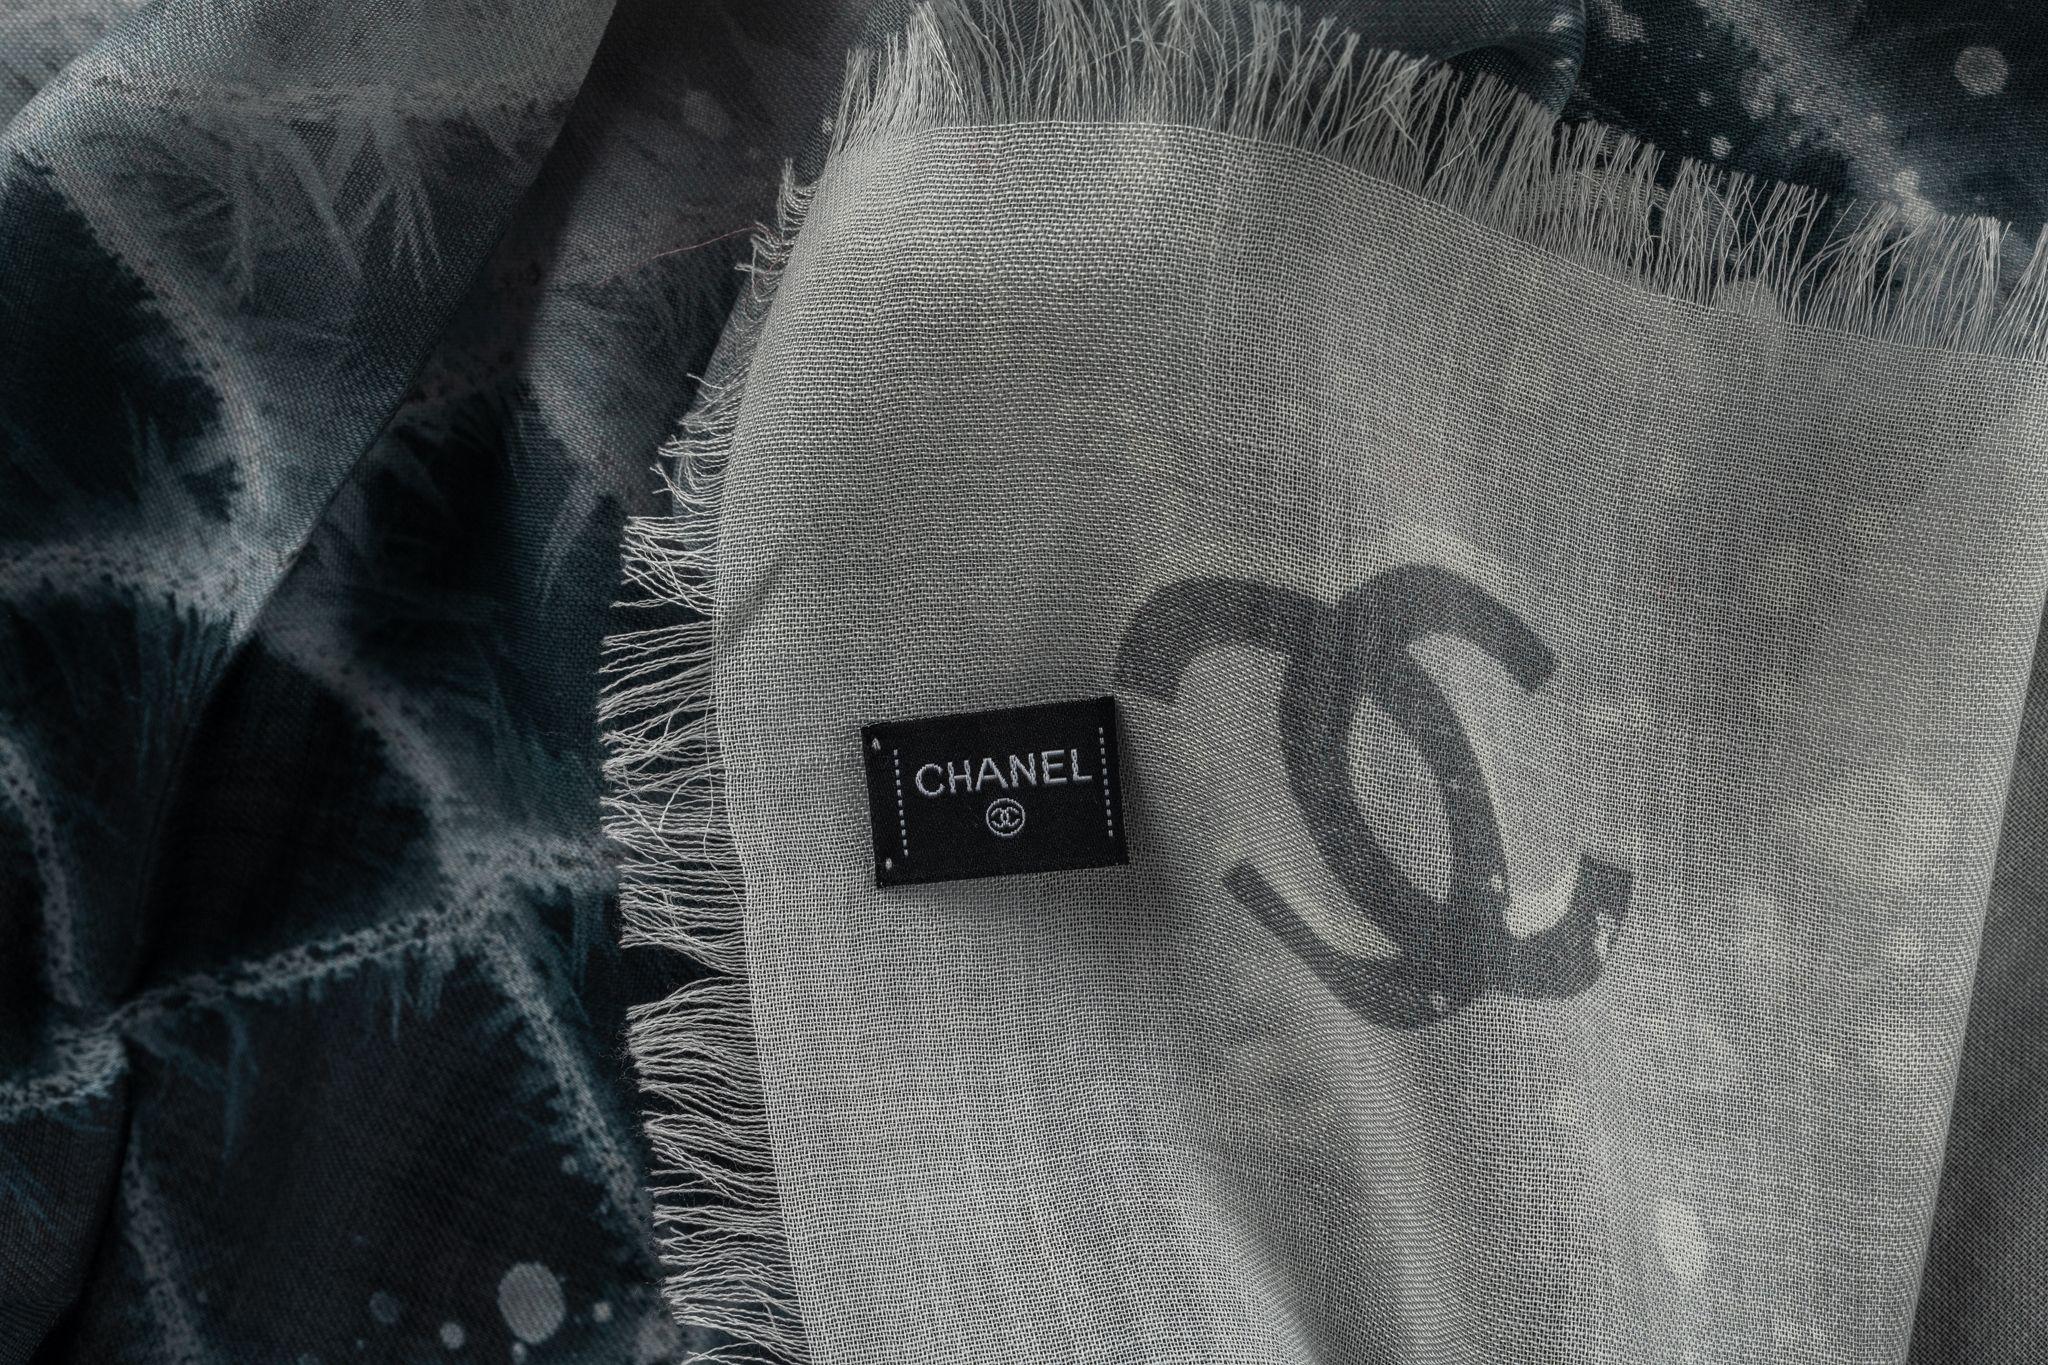 Chanel cashmere shawl in black. The pattern features a checkered design in a dark blue , black and a CC logo. The item is in new condition.